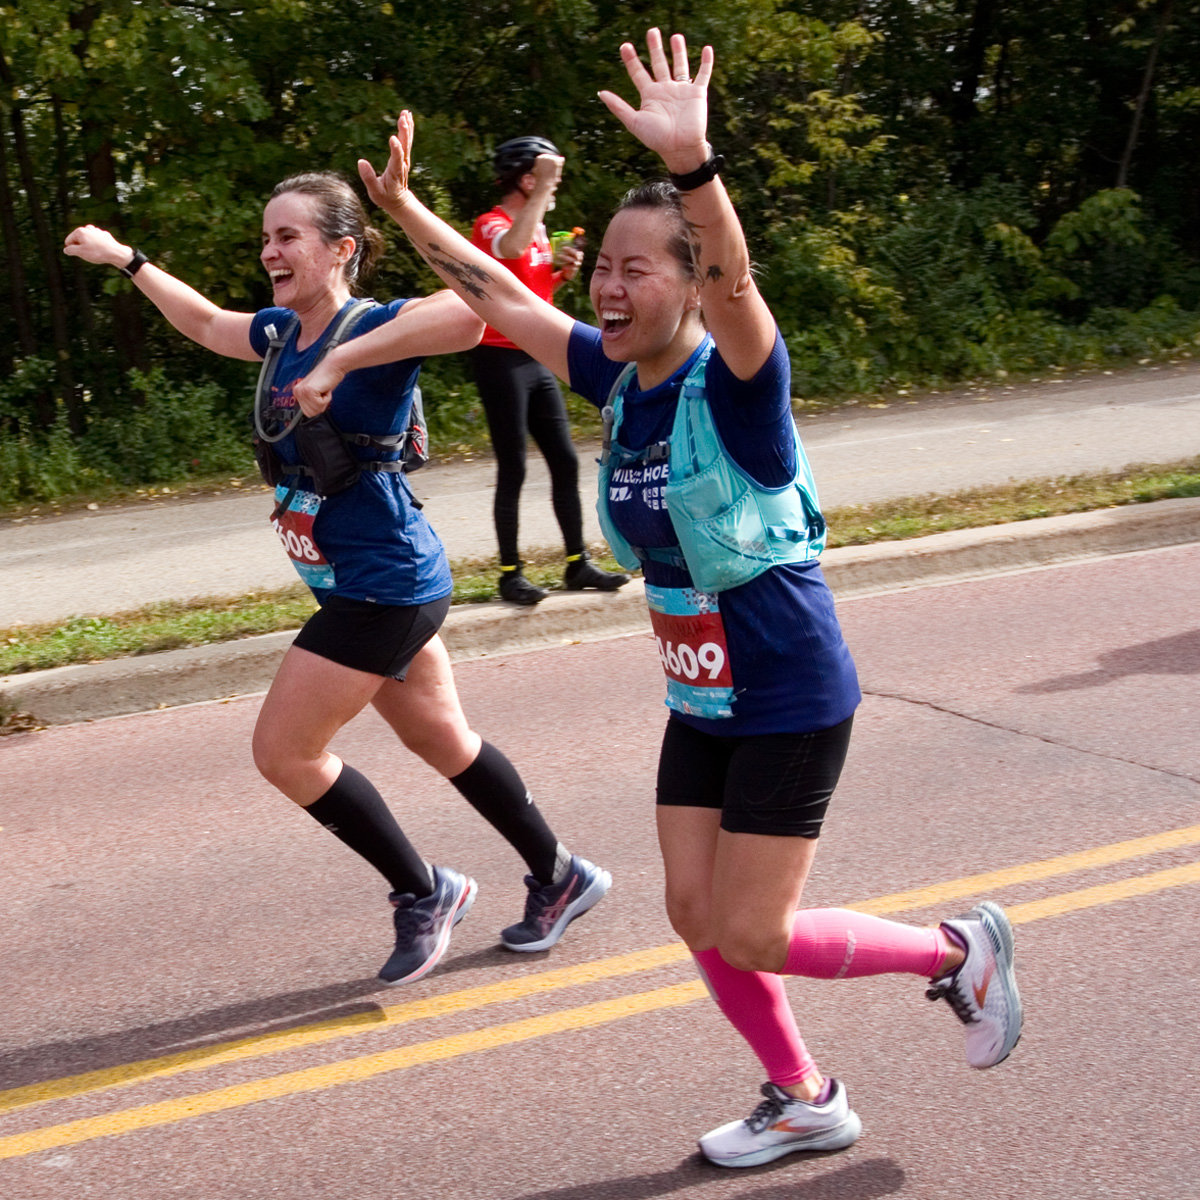 A pair of MiMS runners compete in the full 26.2-mile Twin Cities marathon on Oct. 3. (Photo by Margie O’Loughlin)